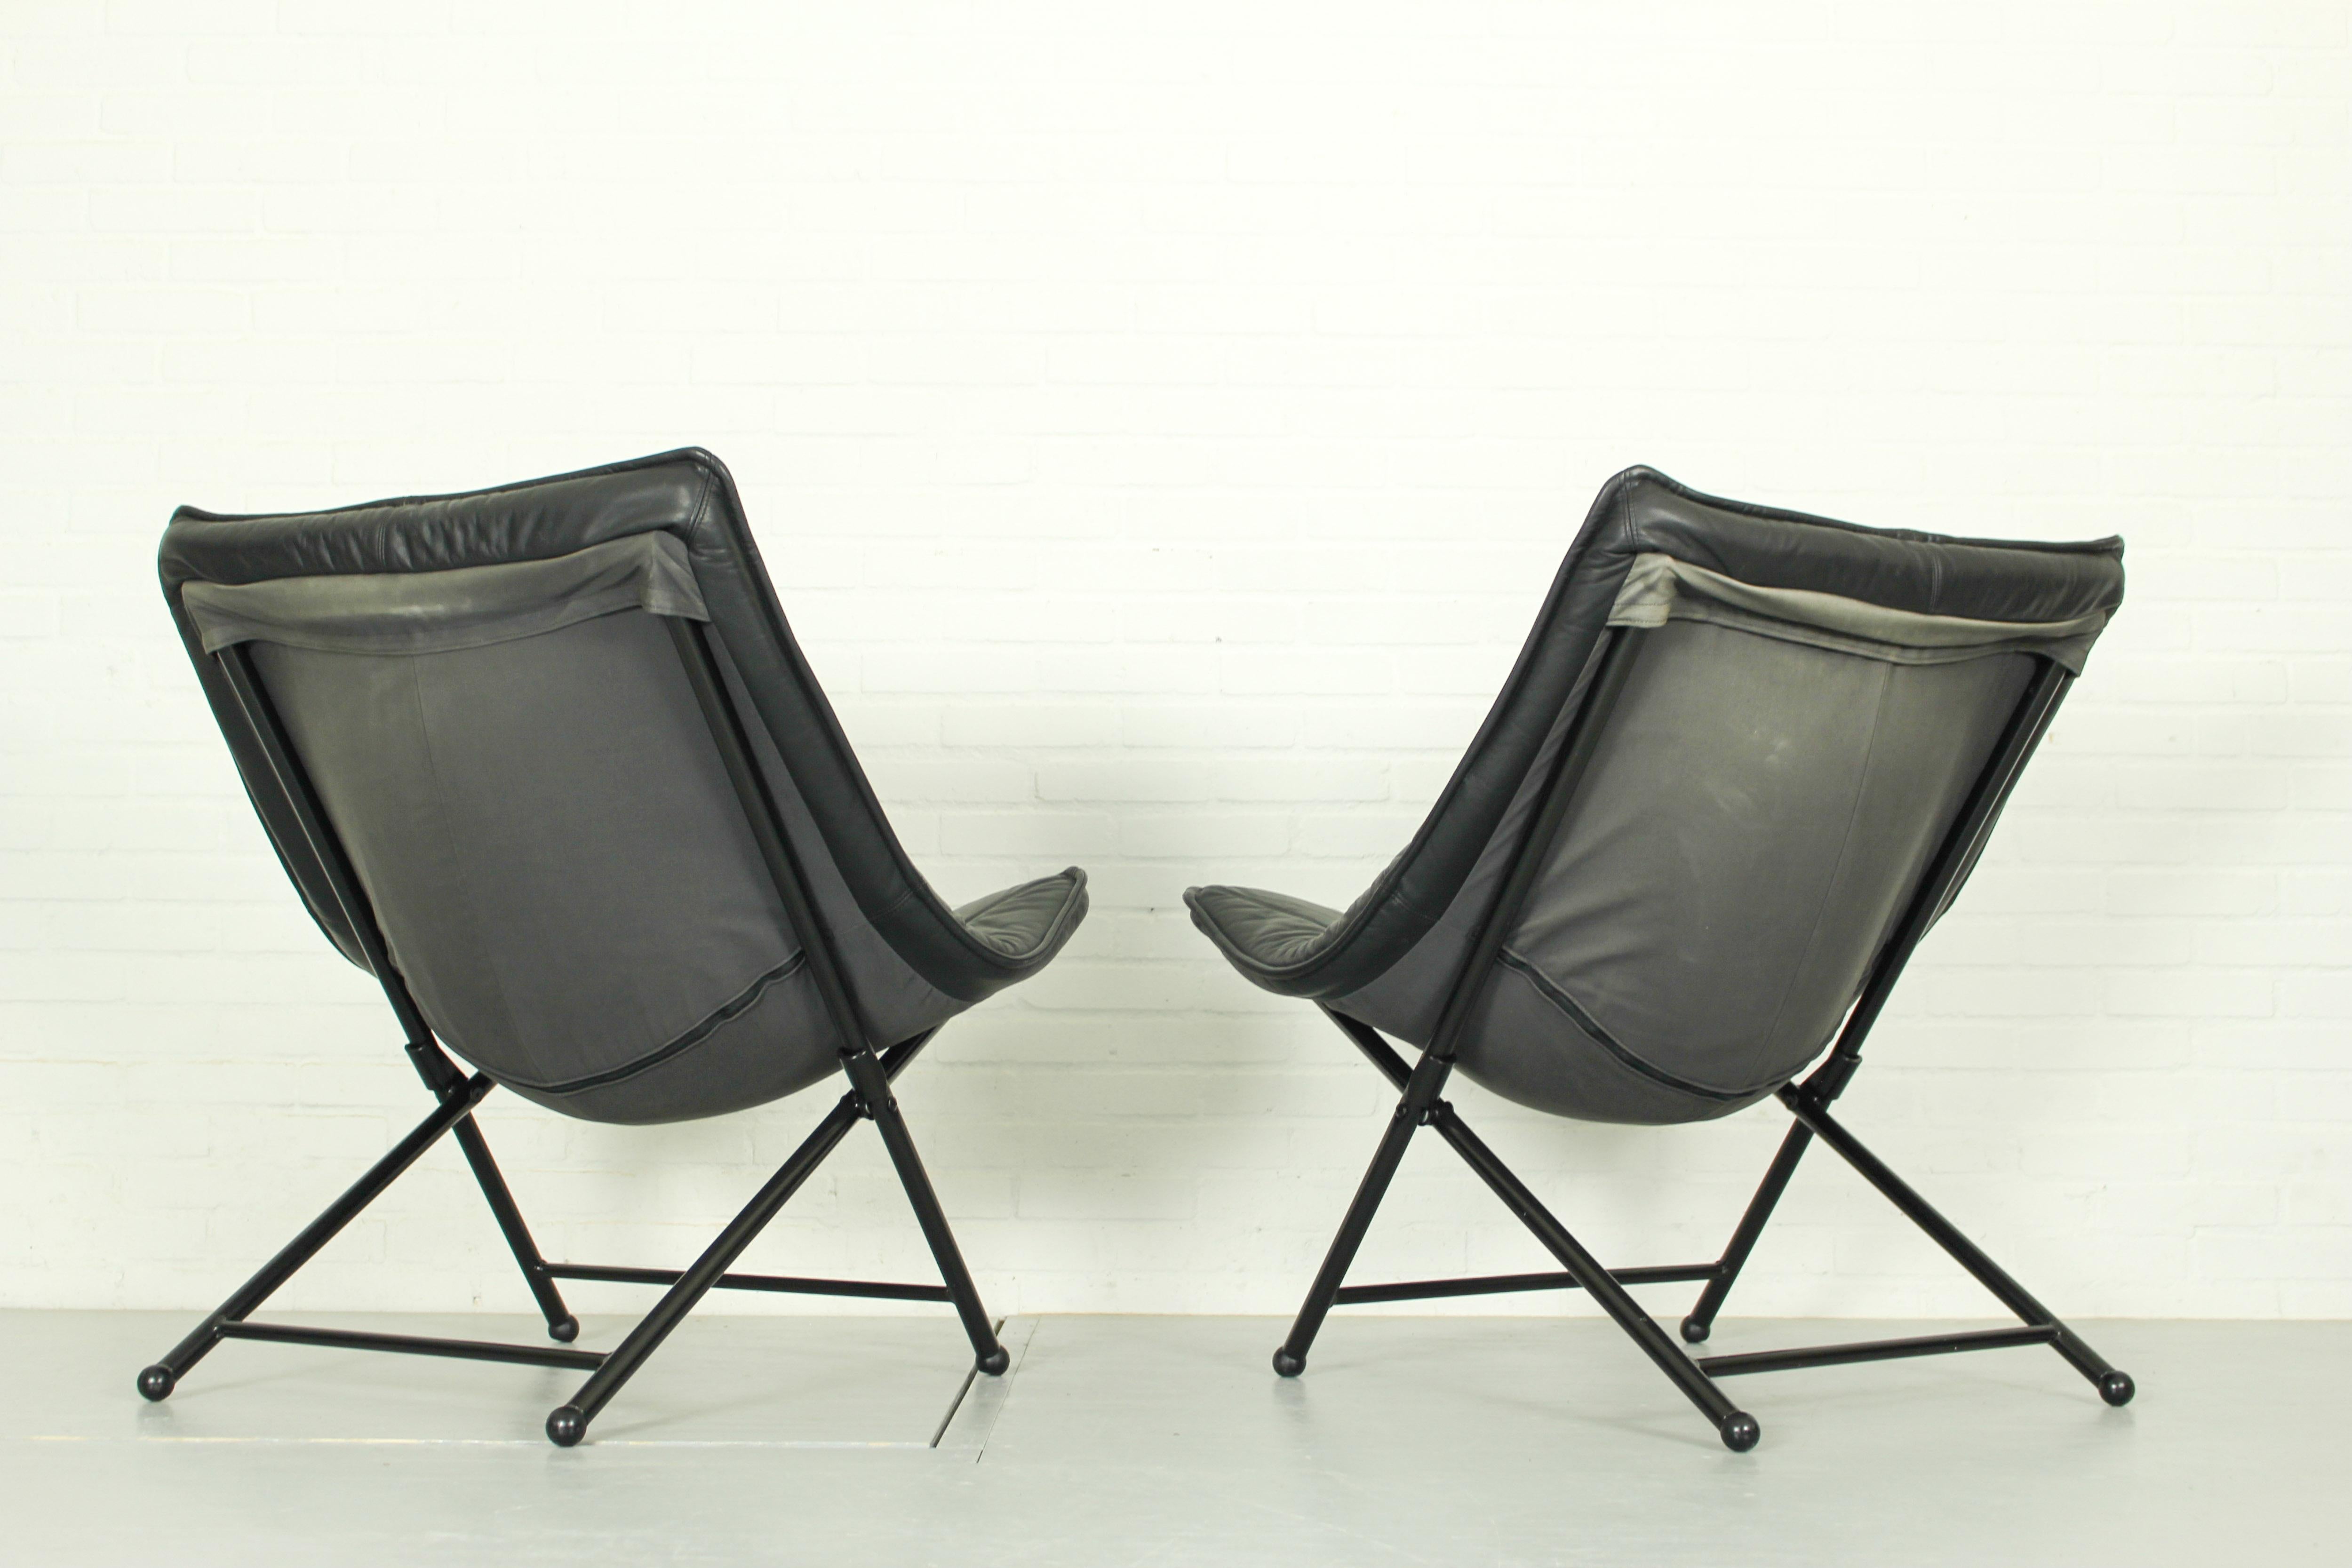 Mid-Century Modern Folding Lounge Chairs in Black Leather by Teun Van Zanten for Molinari, 1970s For Sale